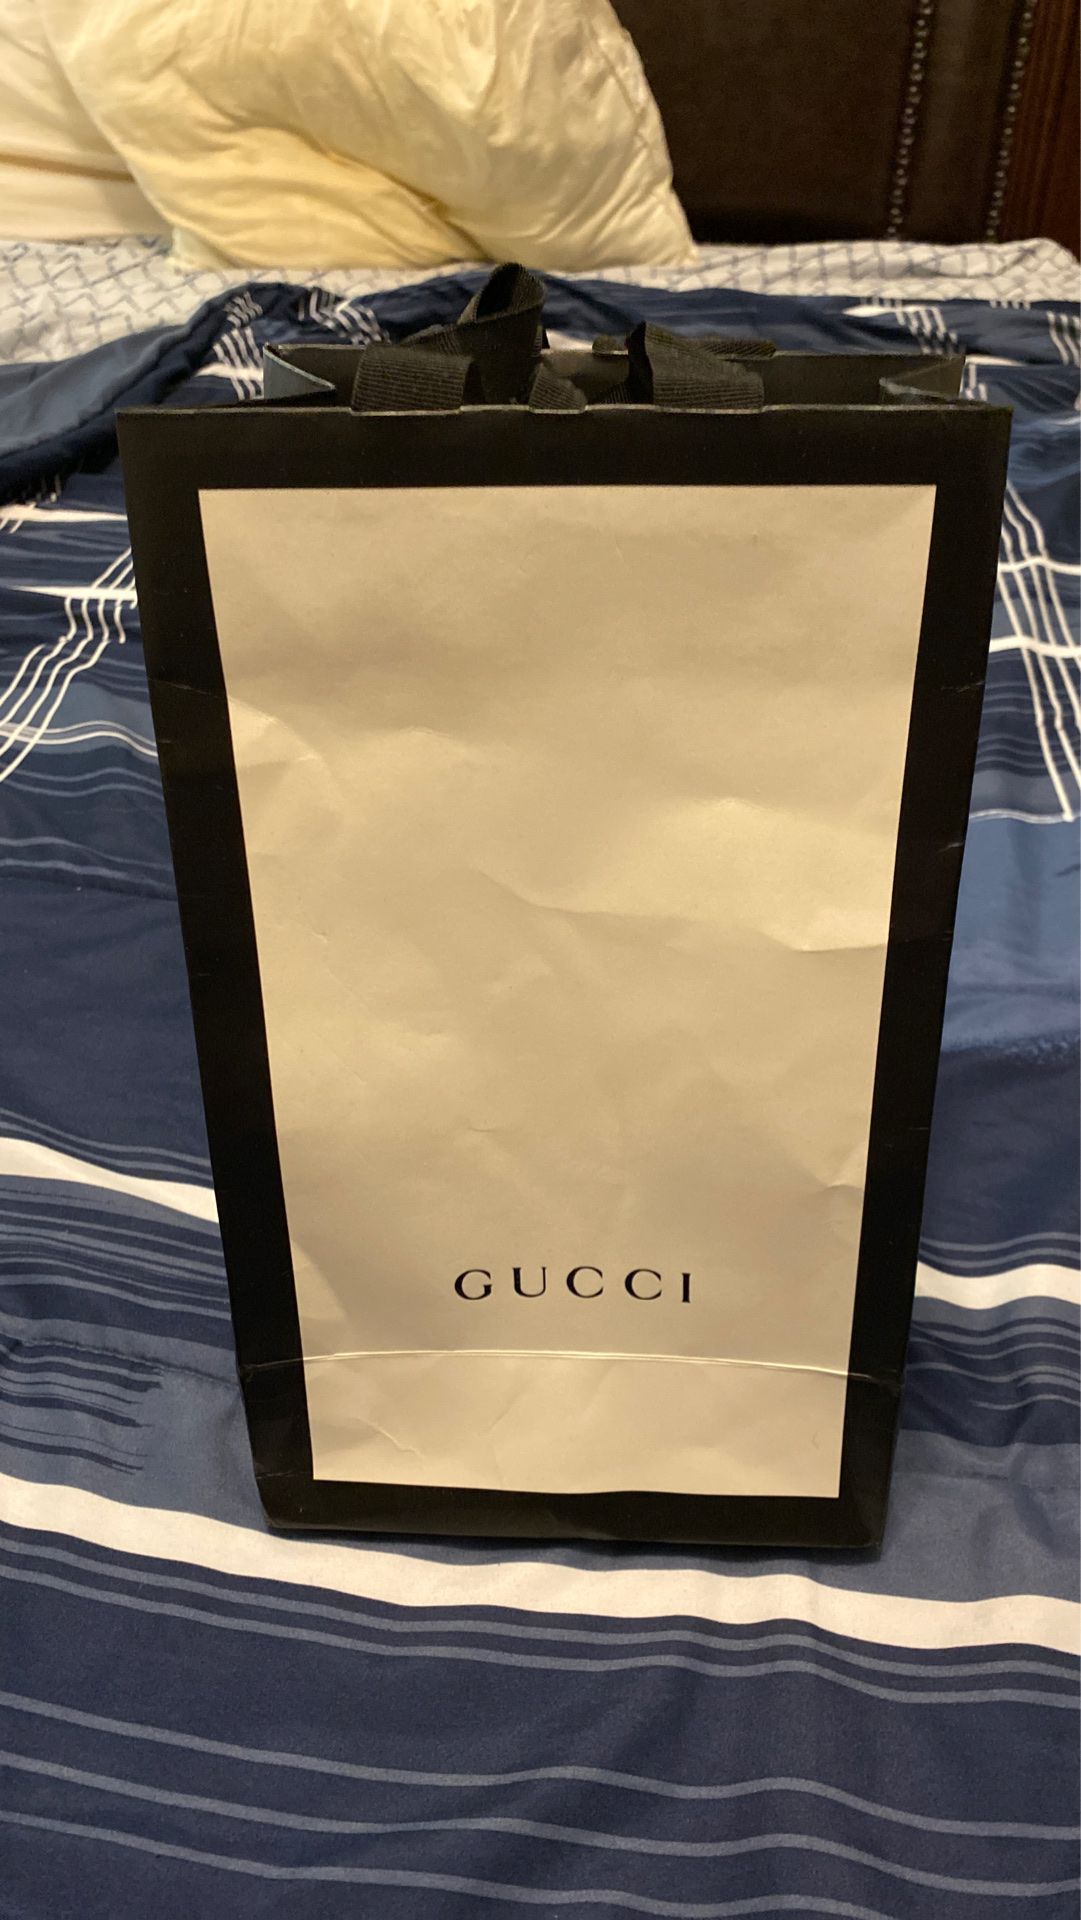 Authentic (Receipt and Bag shown and included) Gucci Belt GG Supreme Interlocking G Buckle1.5W Beige Ebony/Cocoa